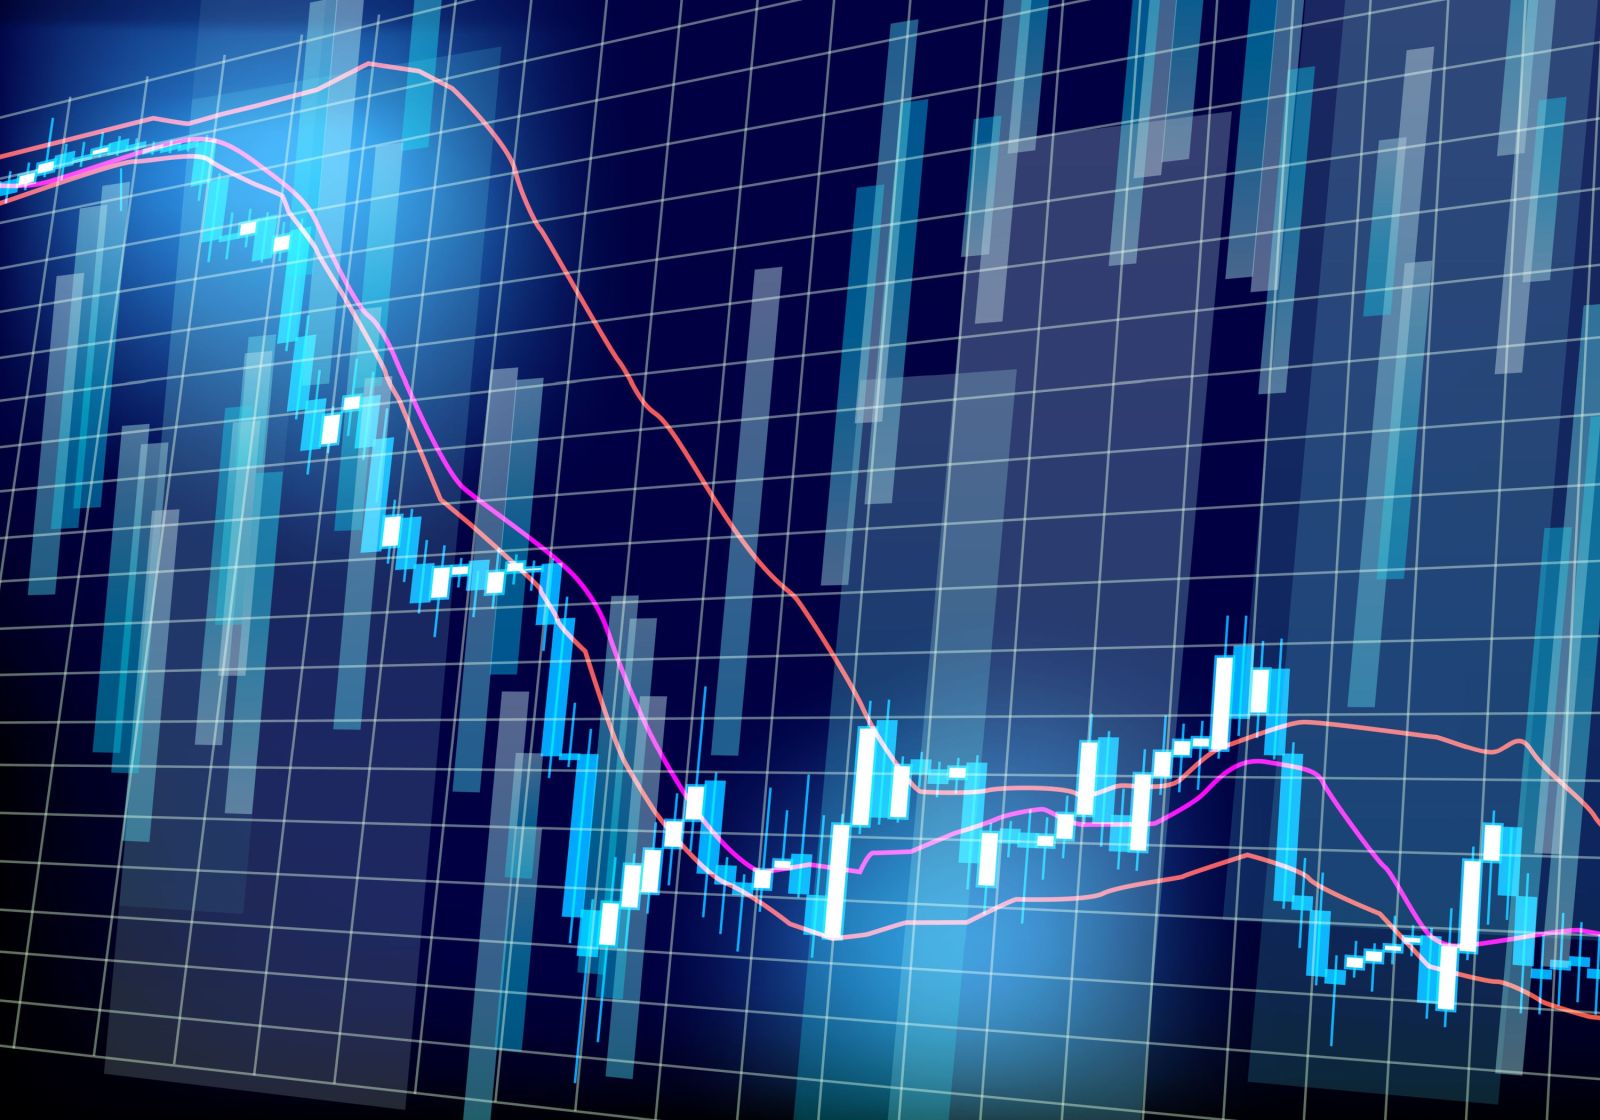 Charts, tickers, traders - Shutterstock_489045022